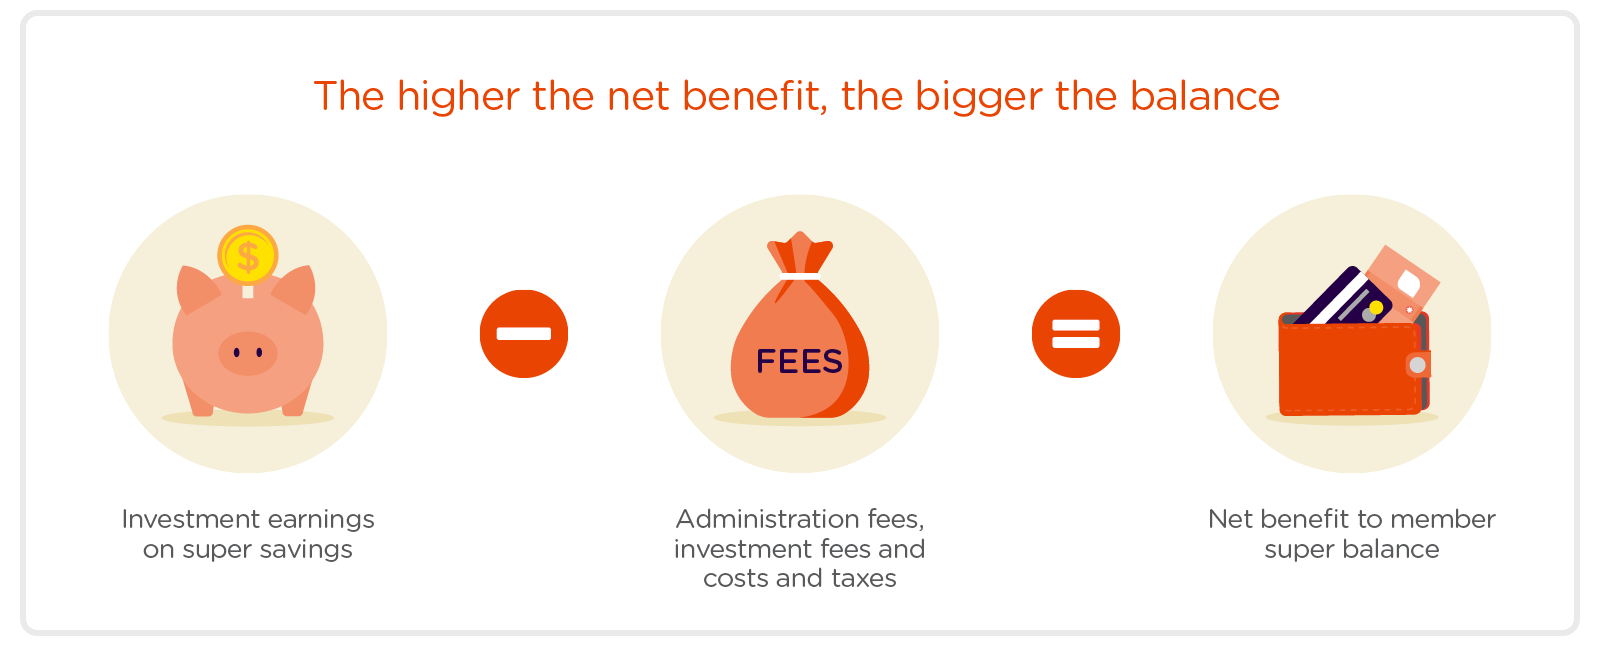 The calculation of net benefit: Investment earnings on your super savings, minus investment and admin fees, equals the net benefit of your super balance. 